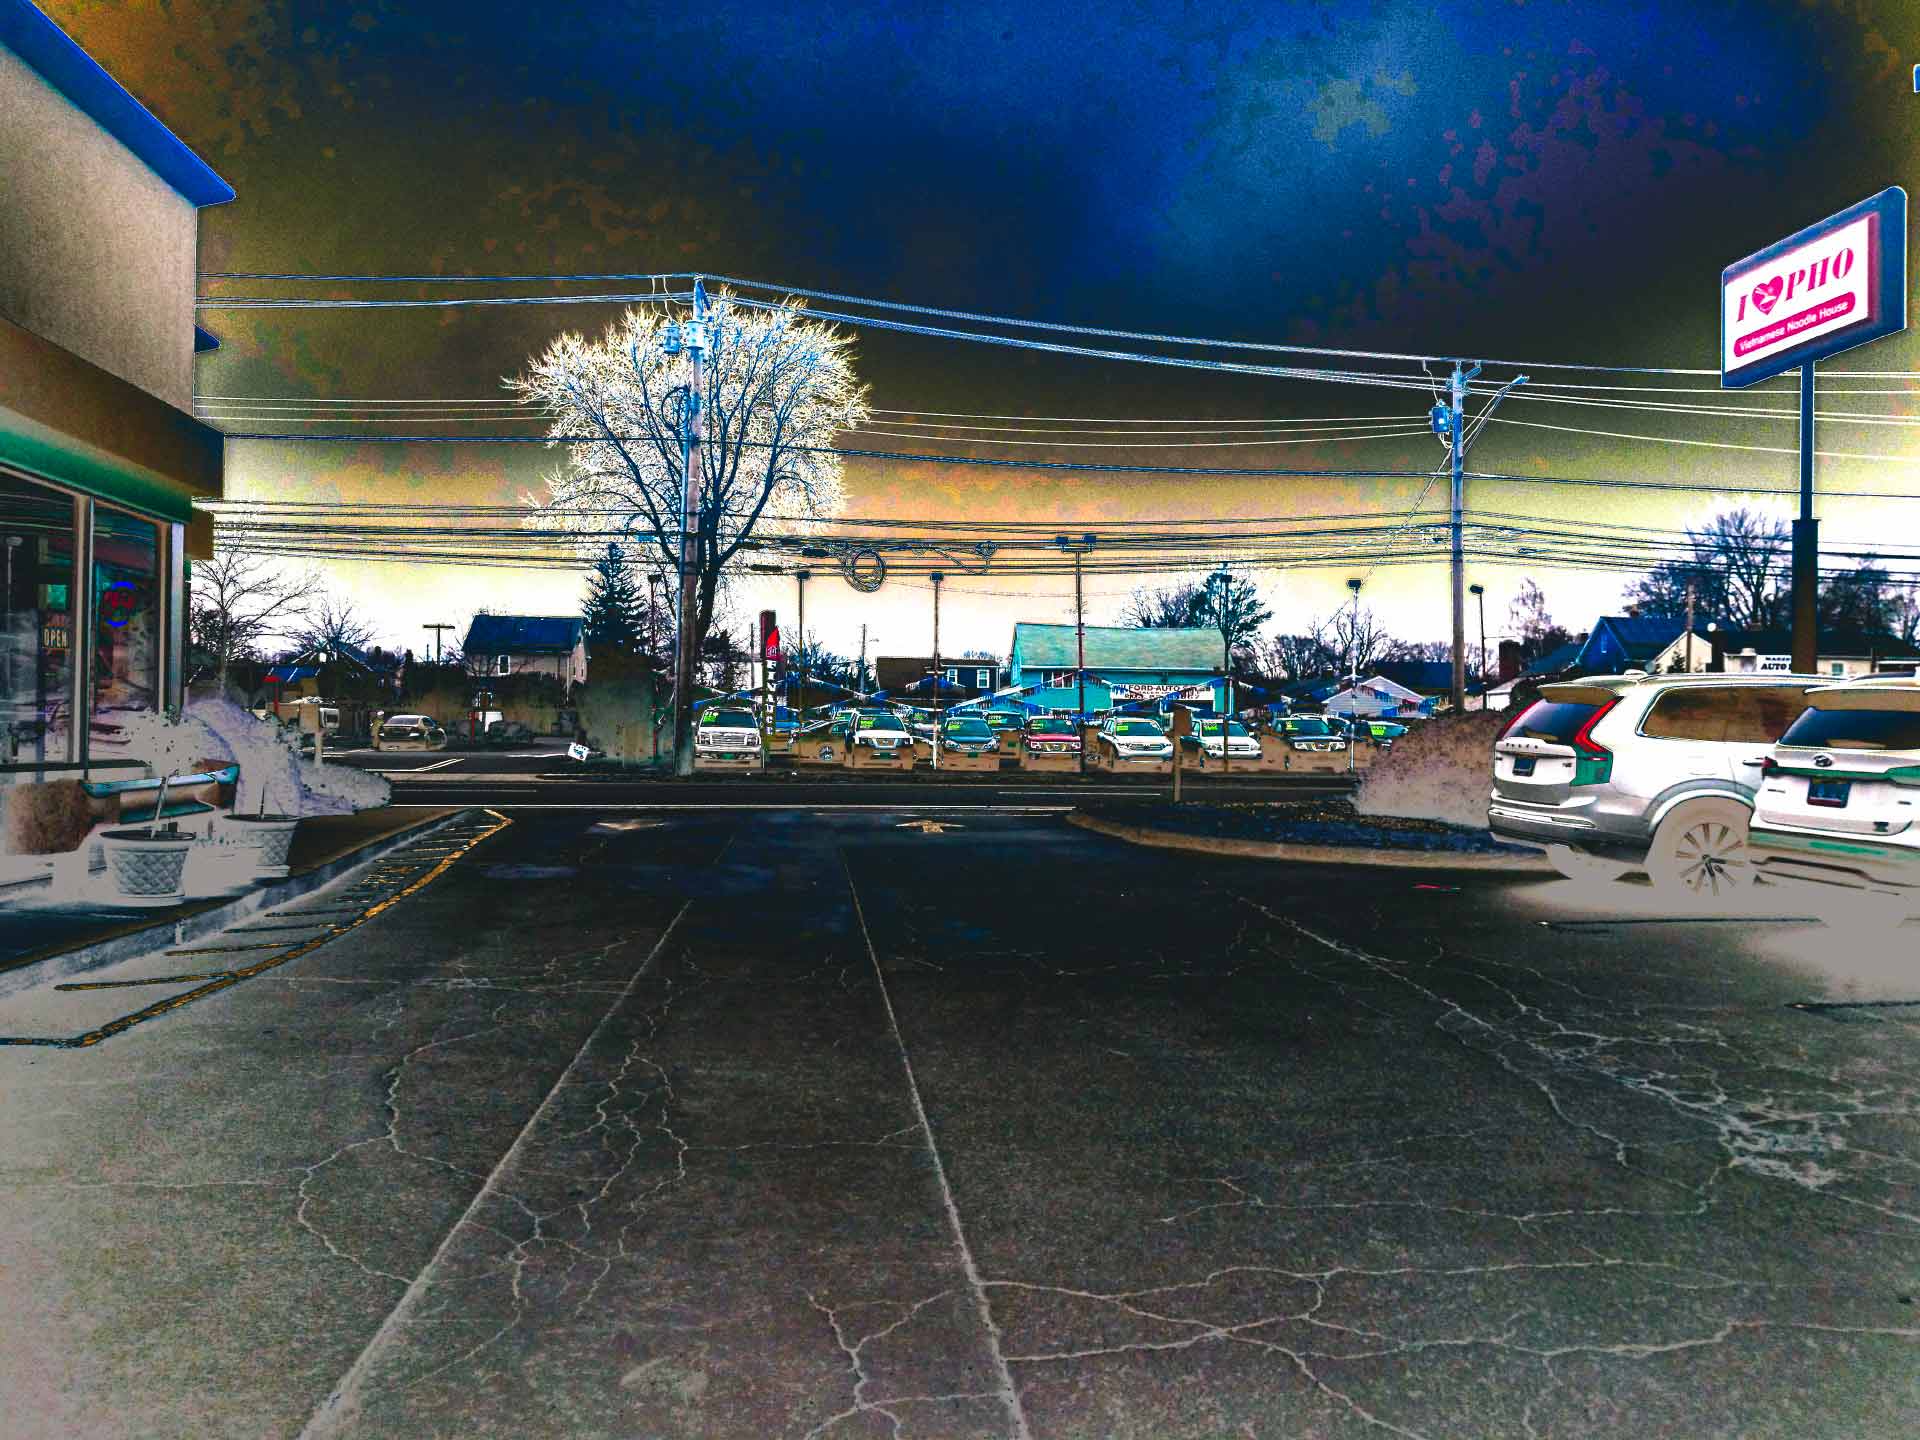 a photo showing a parking lot with inverted colors